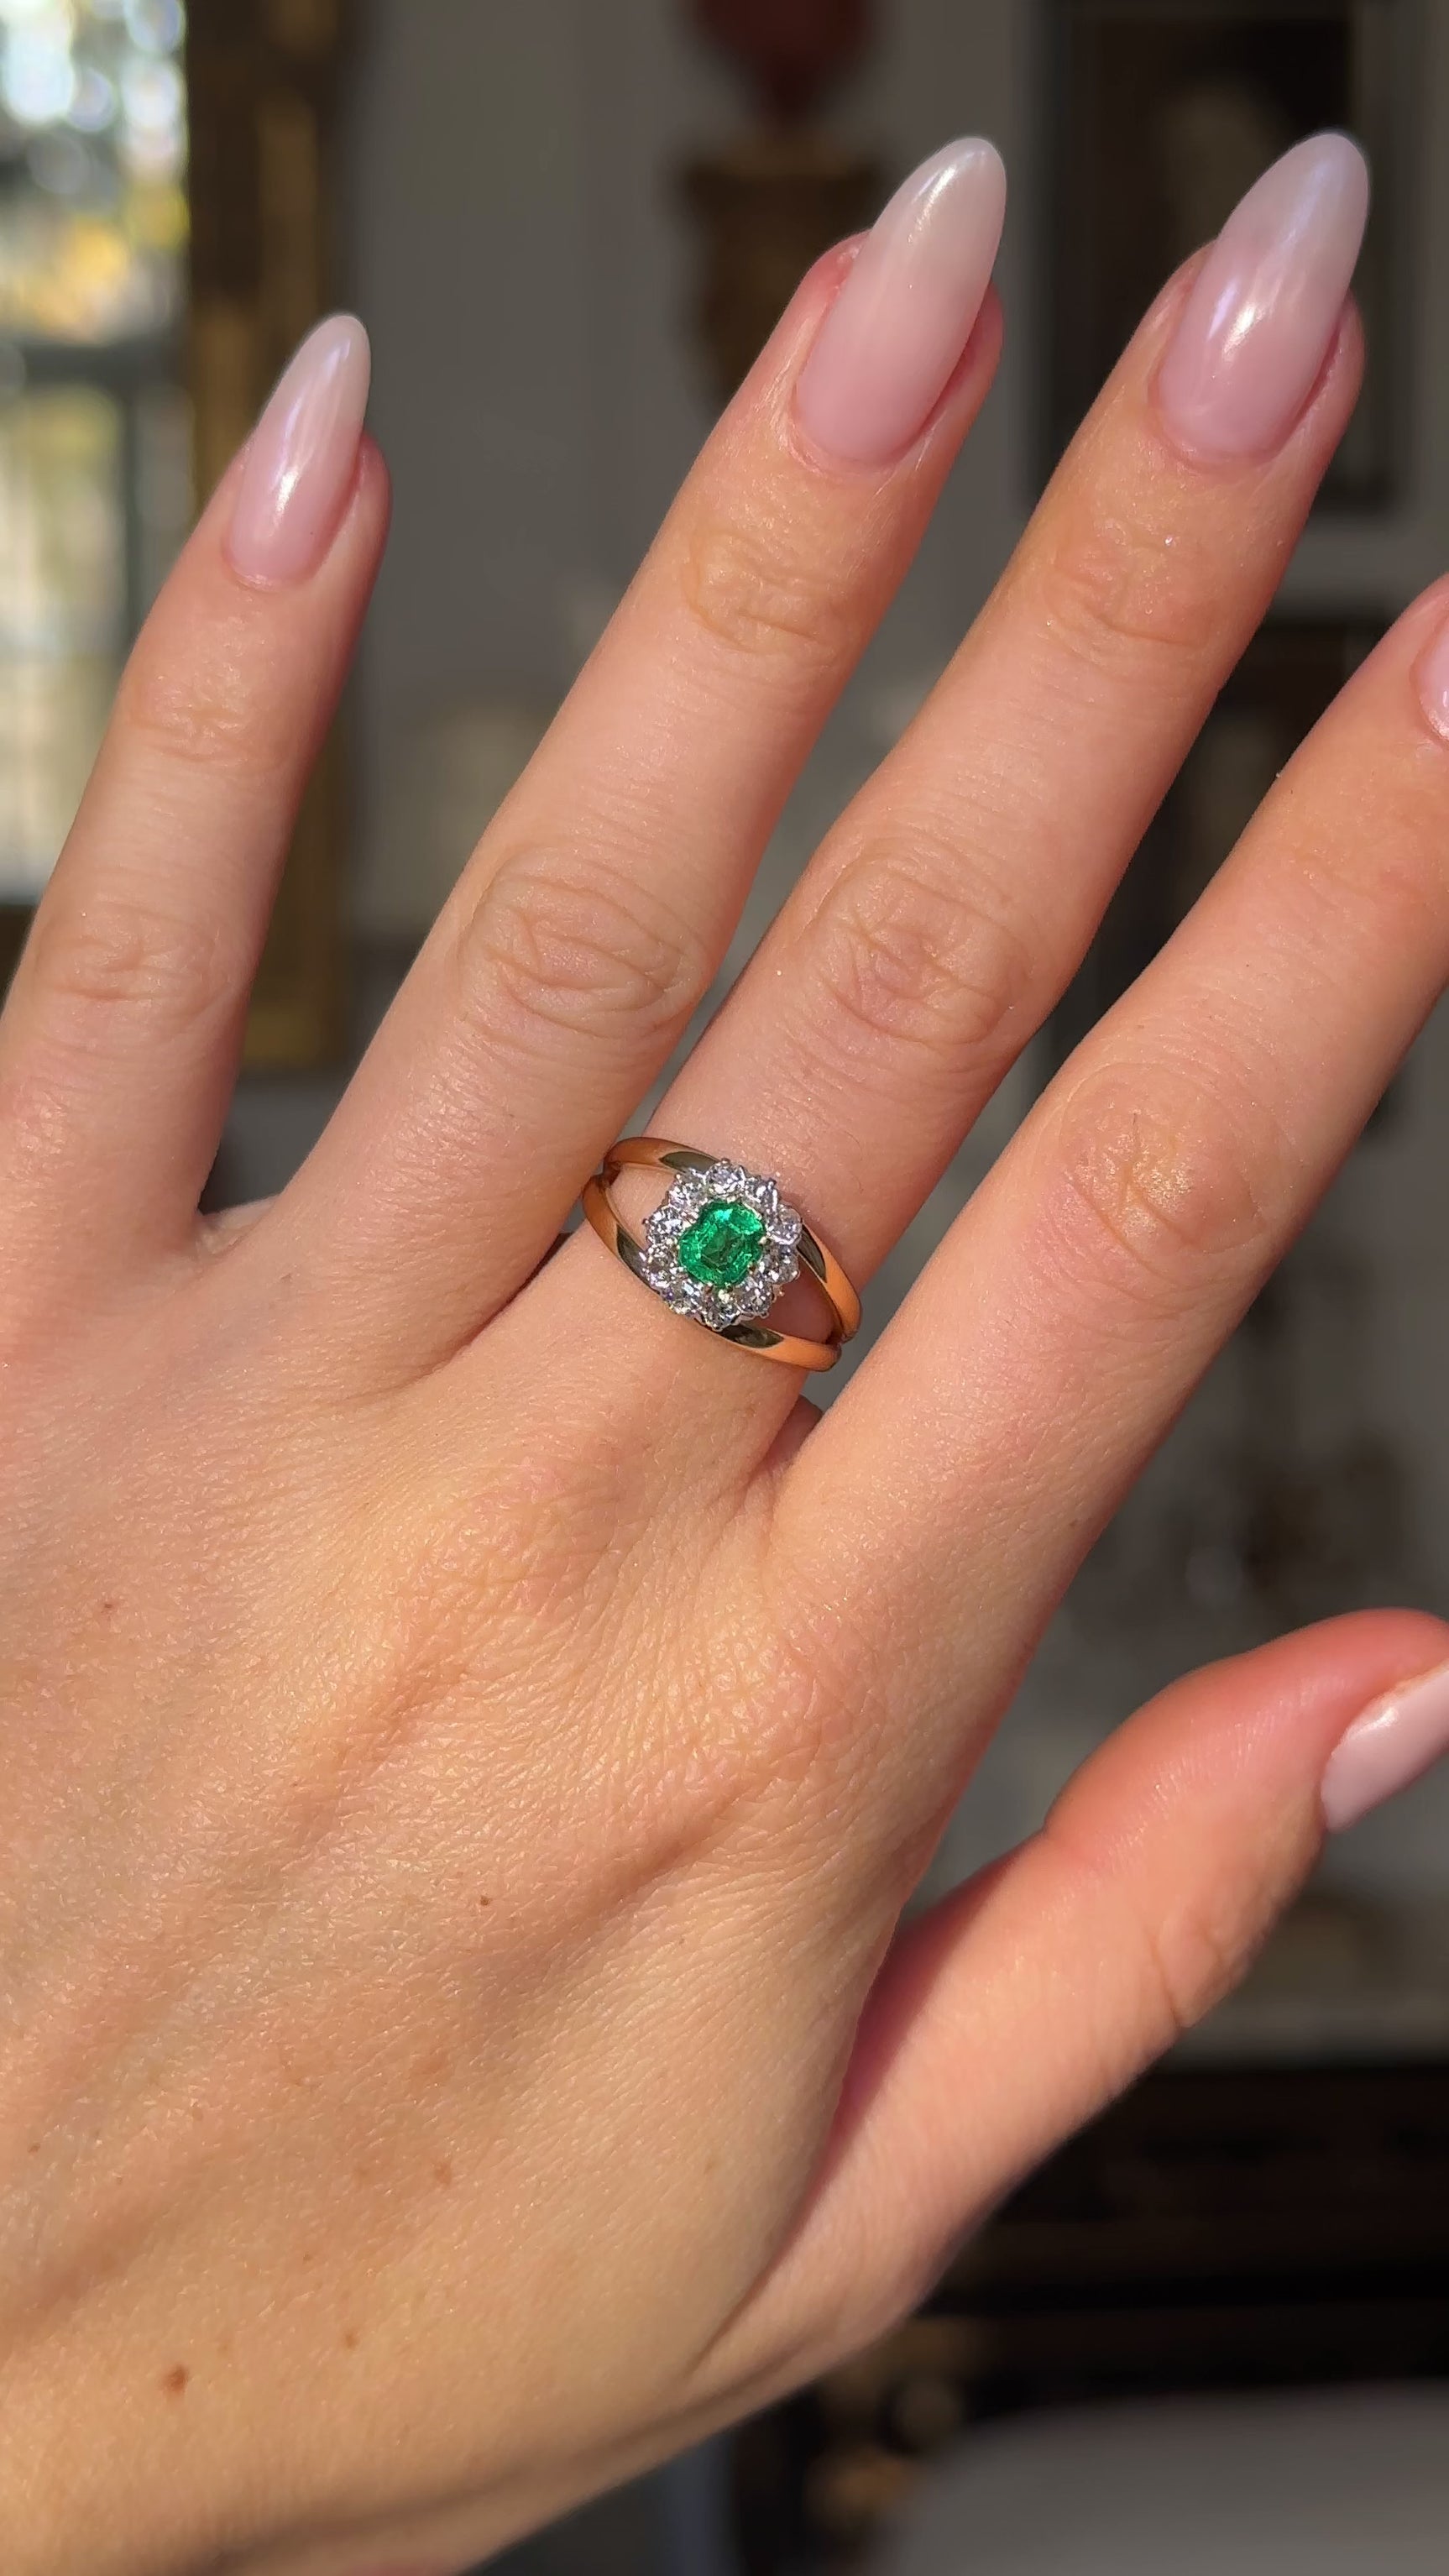 Vintage emerald and diamond cluster ring on hand moved away from camera to give perspective. 